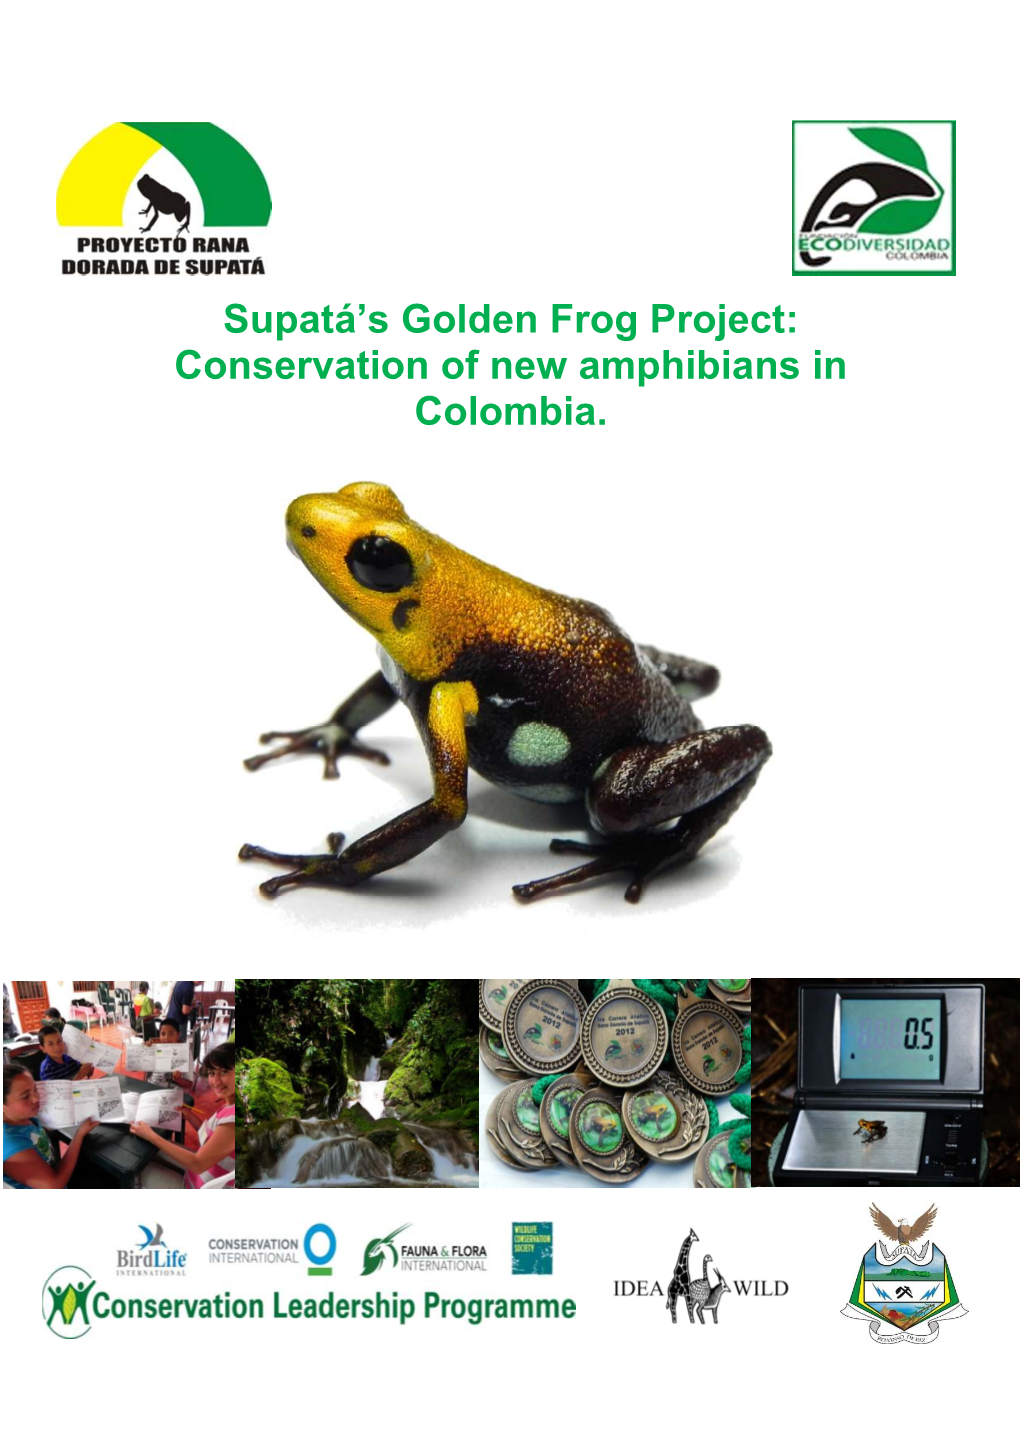 Supatá's Golden Frog Project: Conservation of New Amphibians In